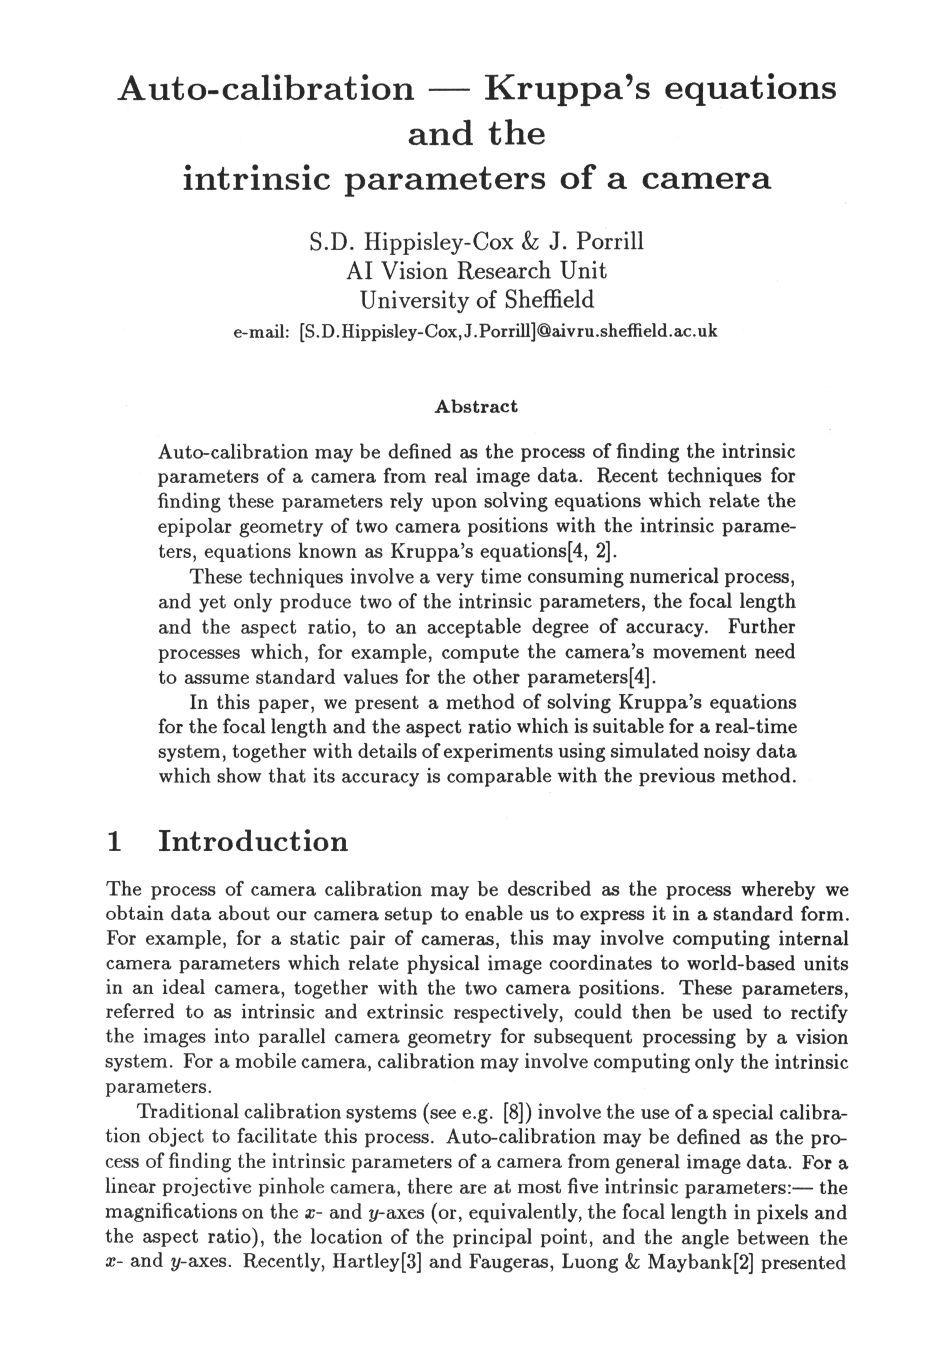 Auto-calibration Kruppa's equations and the intrinsic parameters of a camera S.D. Hippisley-Cox & J. Porrill AI Vision Research Unit University of Sheffield e-mail: [S.D.Hippisley-Cox,J.